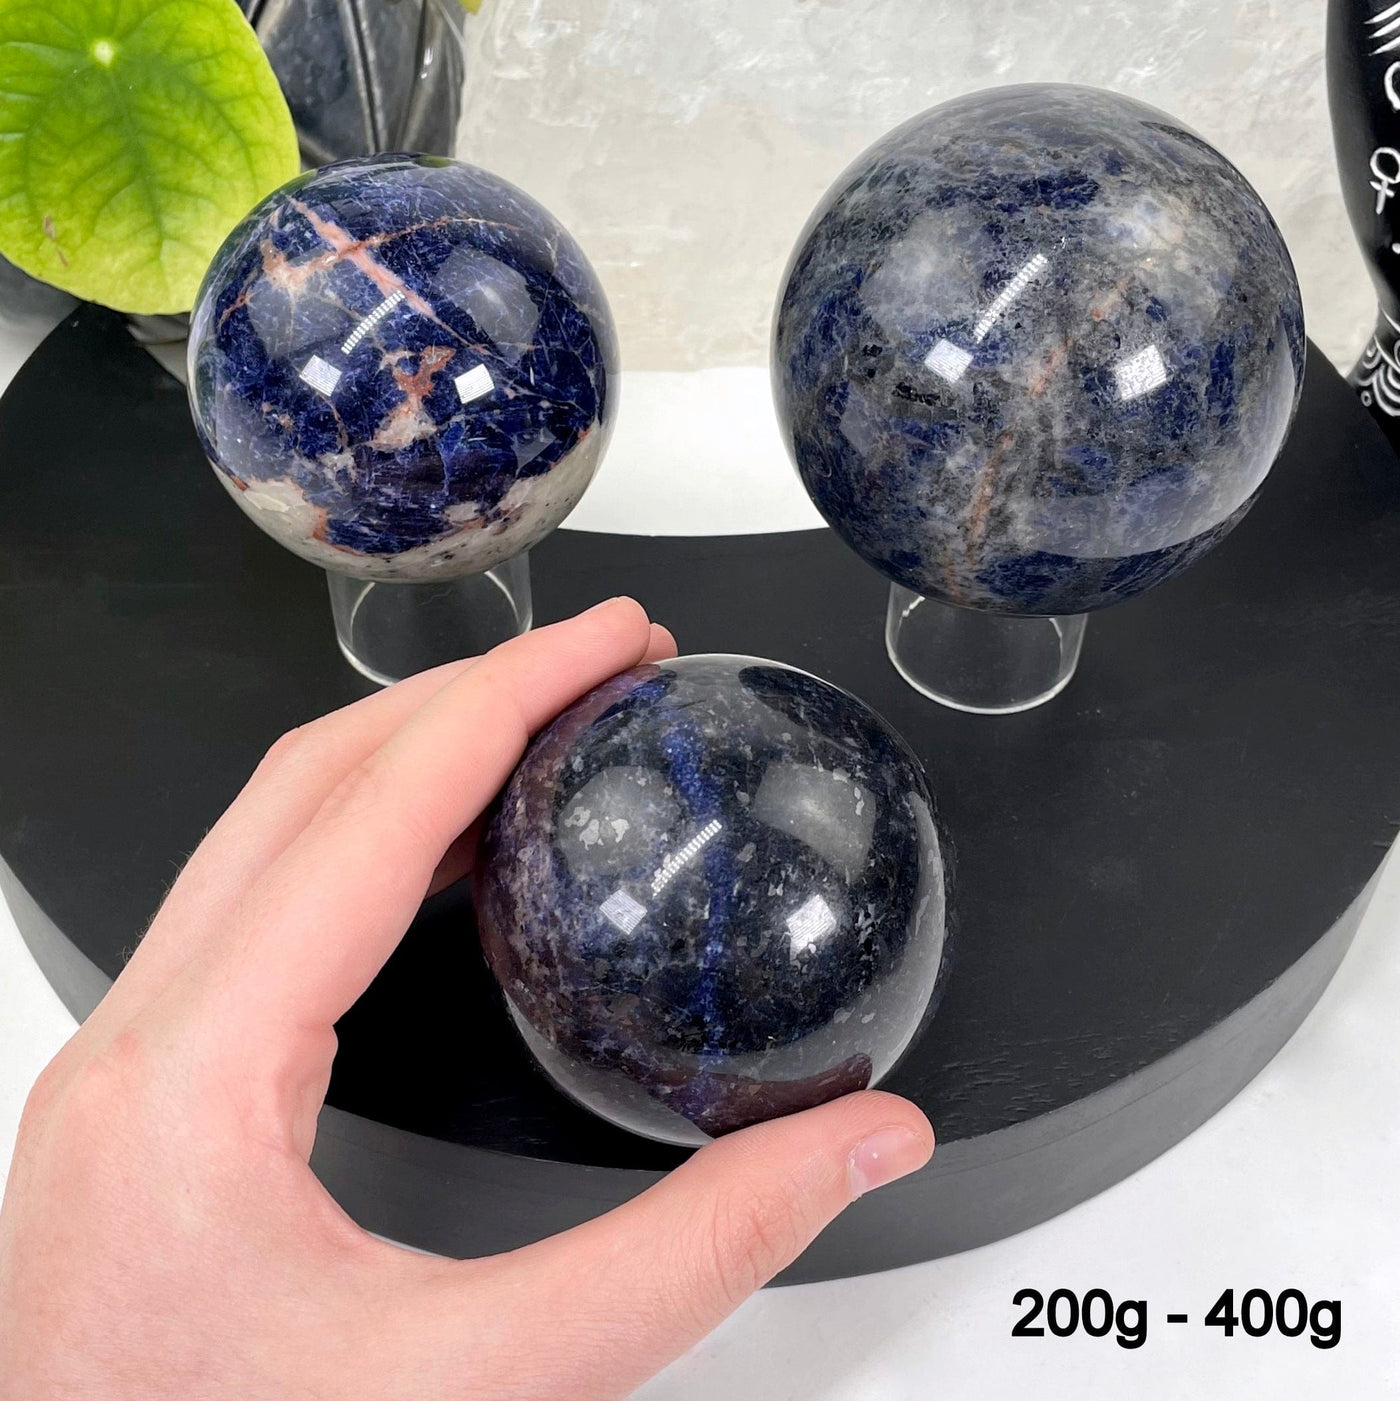 three 200g - 400g sodalite polished spheres on display for possible variations with one in hand for size reference